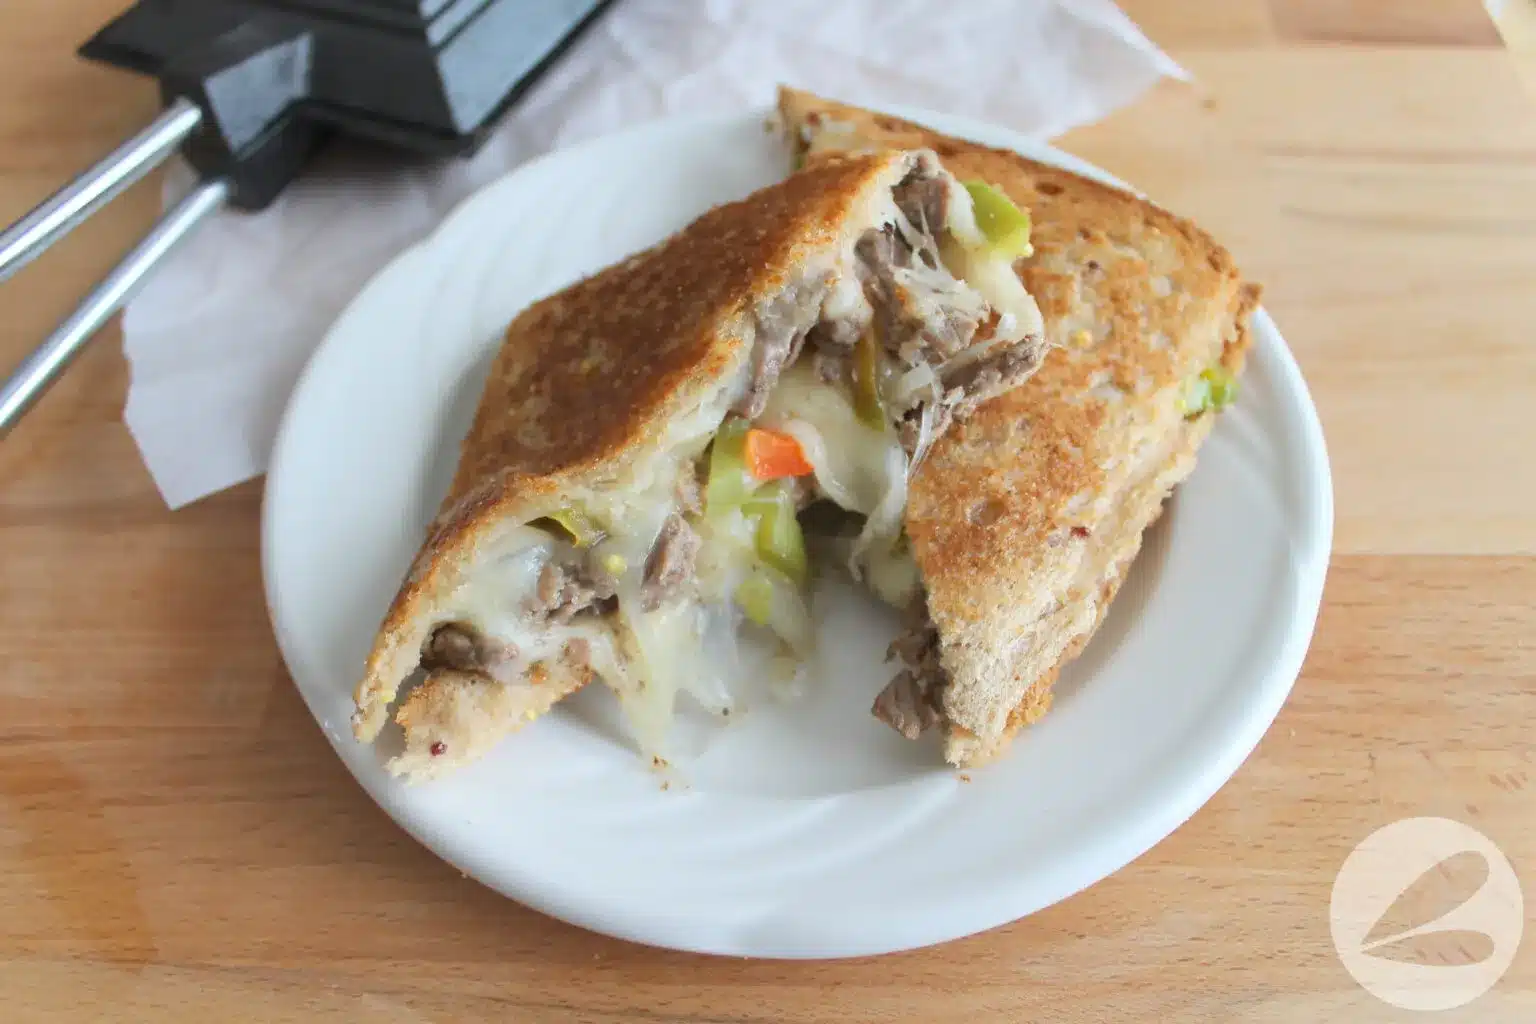 Steak, vegetables, and melted cheese inside grilled bread.